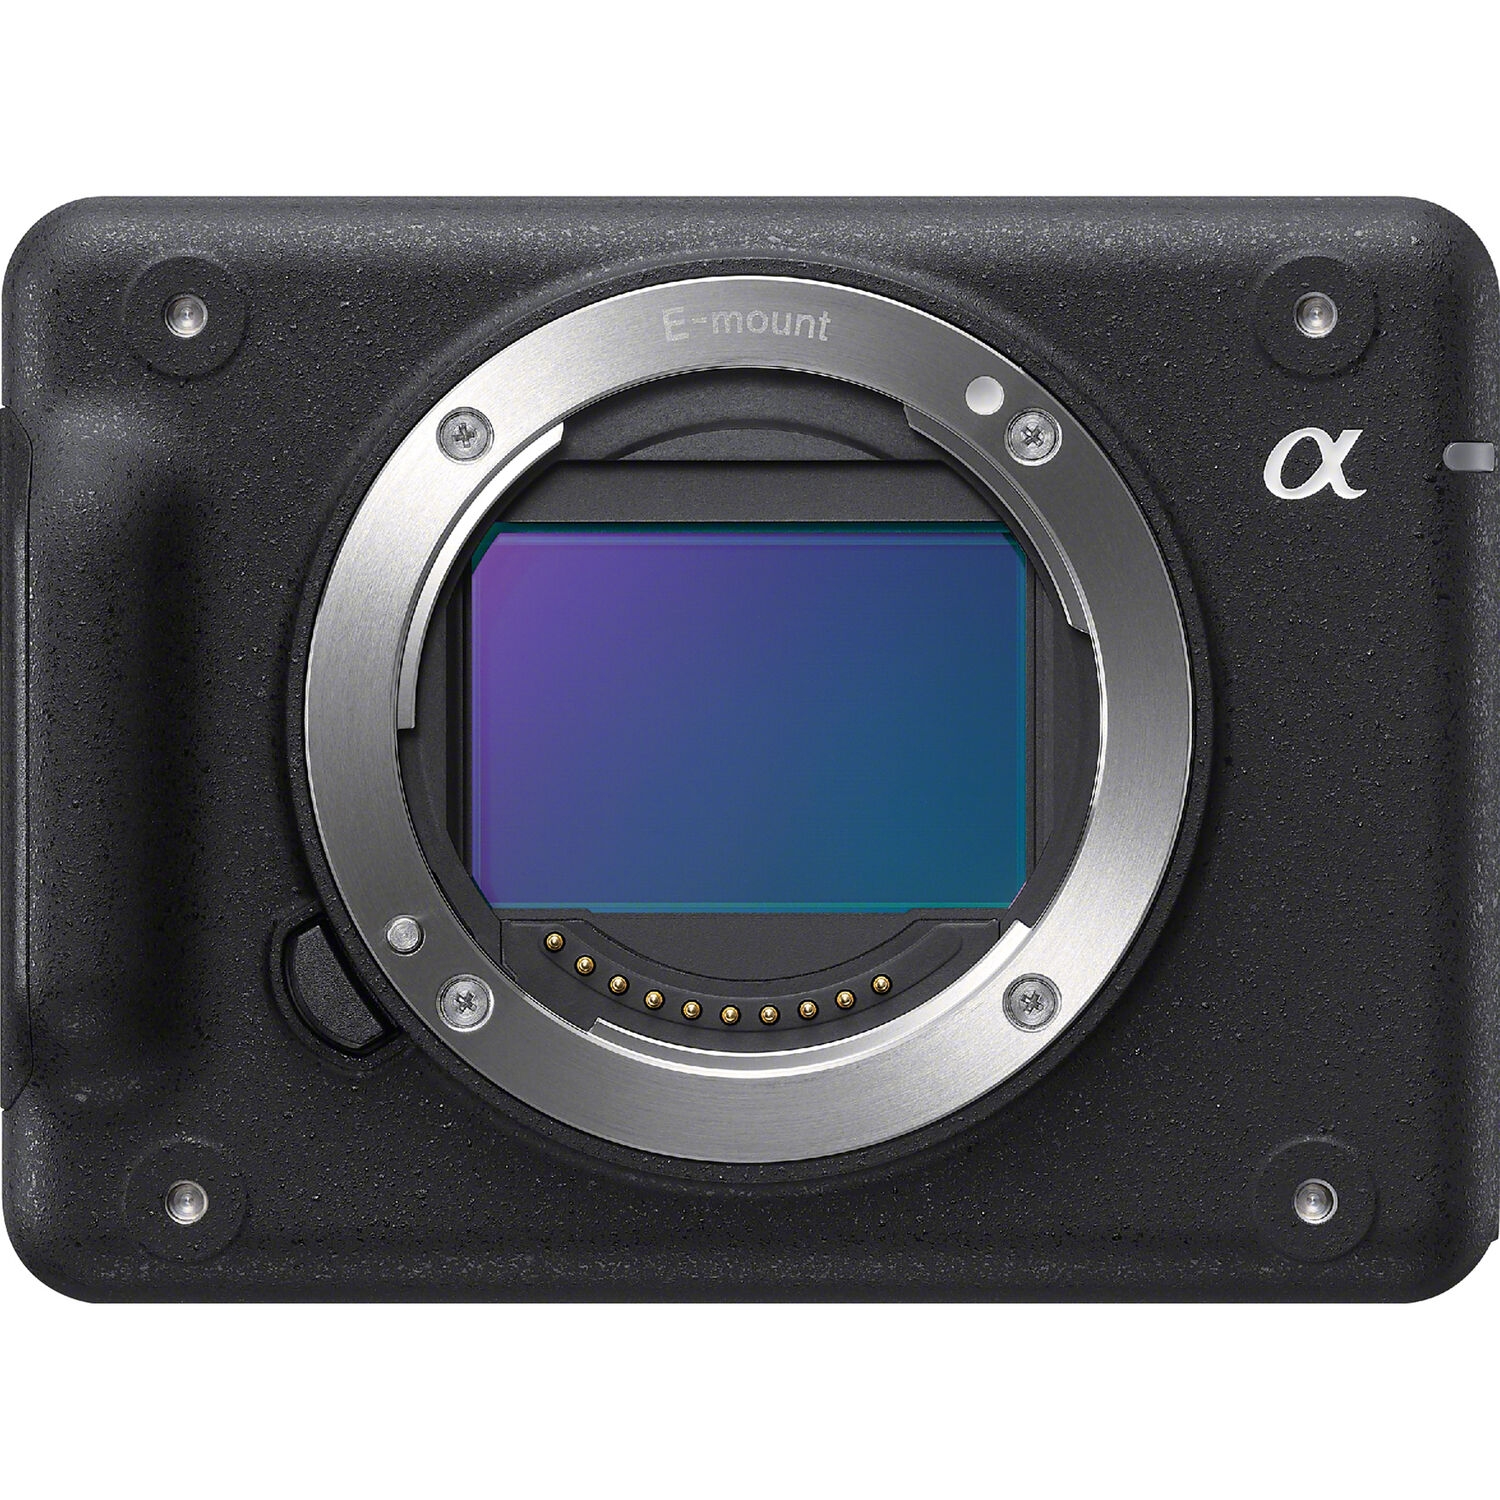 New Release: ILX-LR1 Industrial Camera